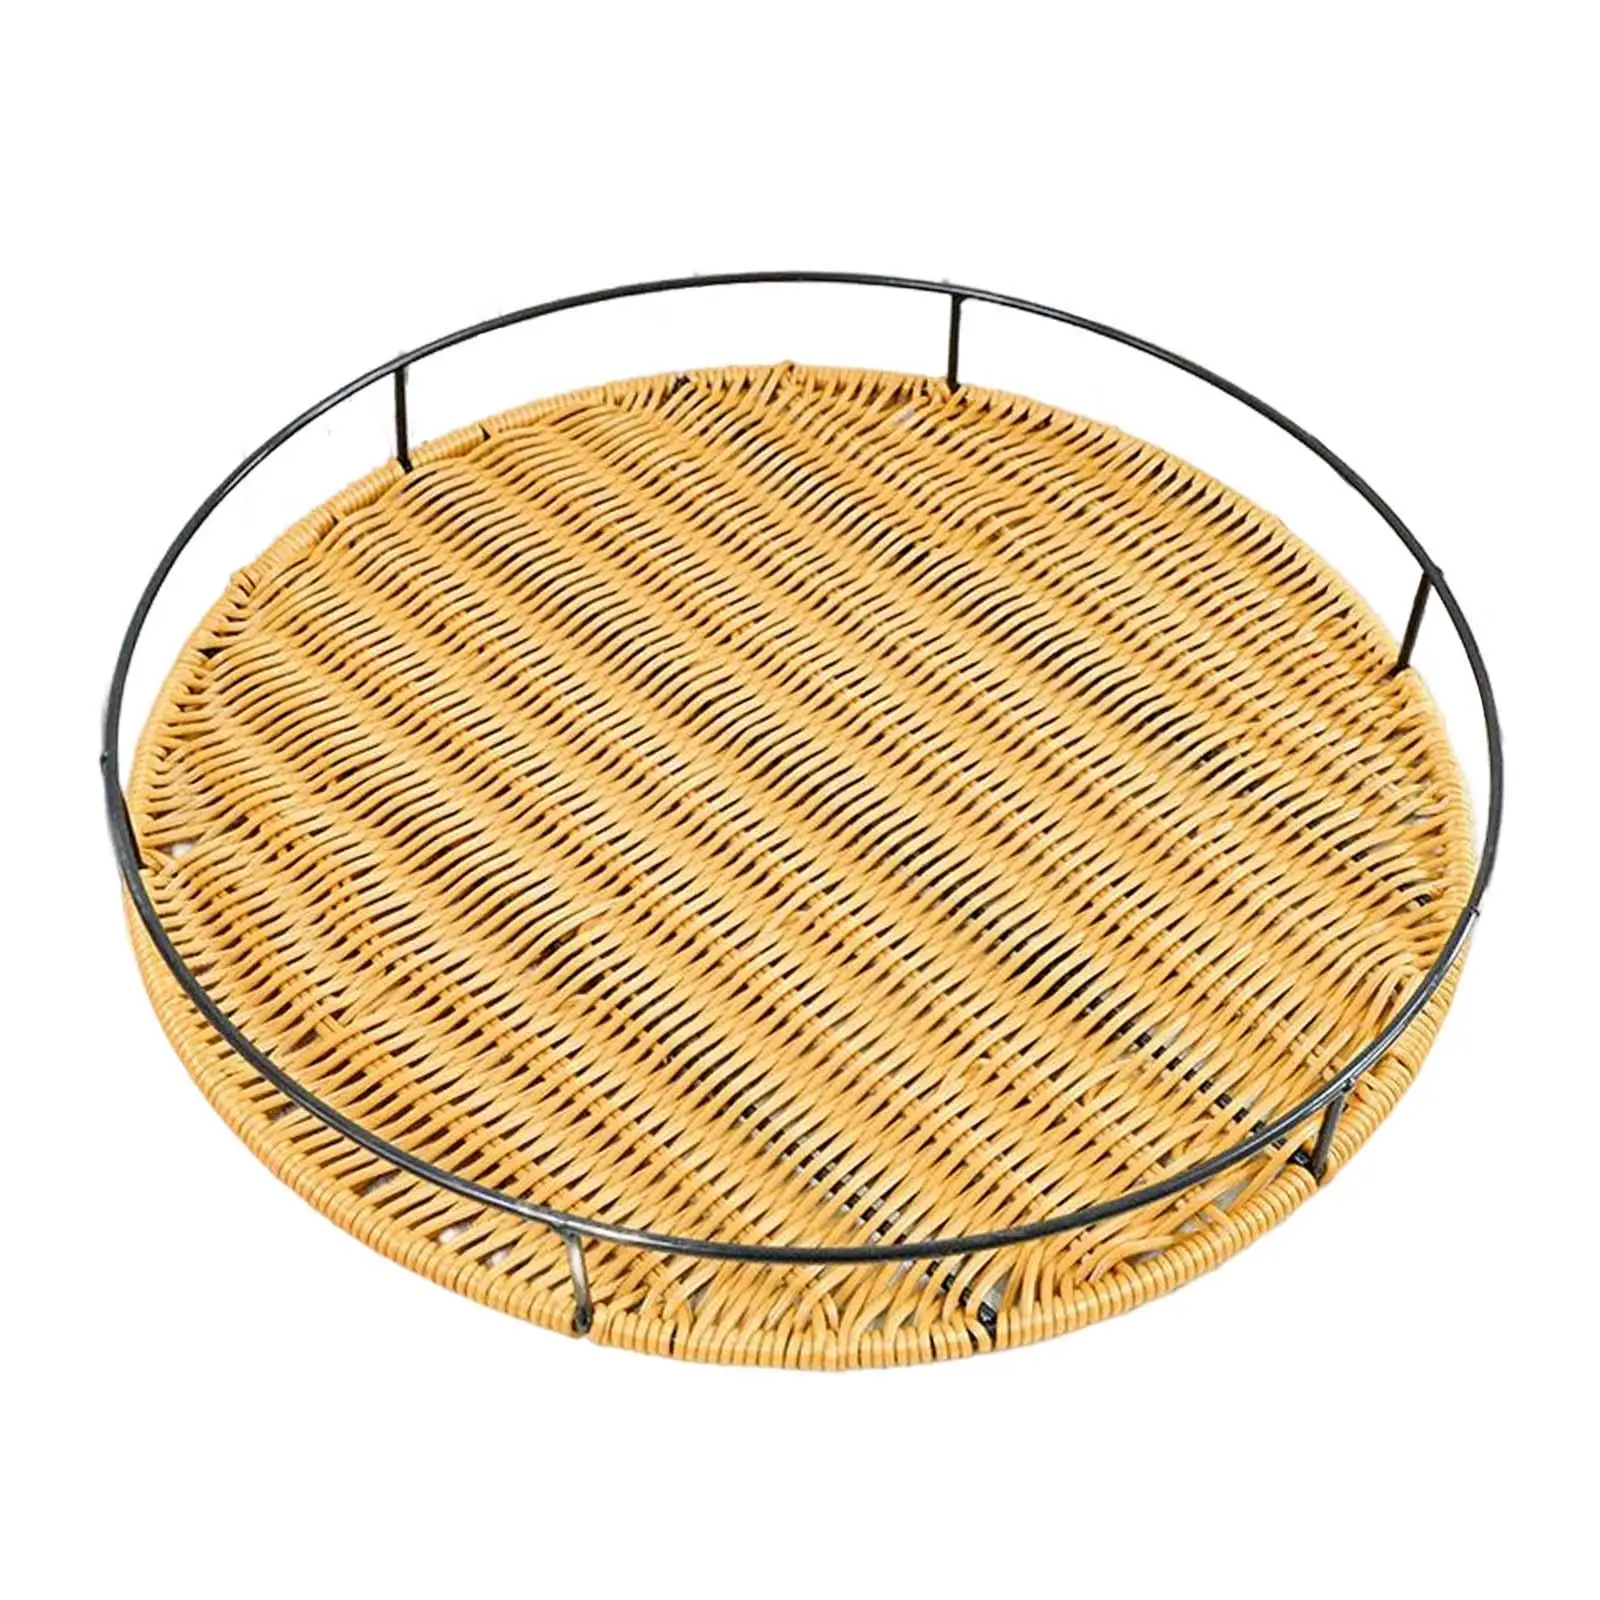 Rattan Tray Home Decor Handmade Fruit Storage Organizer Woven Bread Basket for Dinner Bathroom Party Dining Home Kitchen